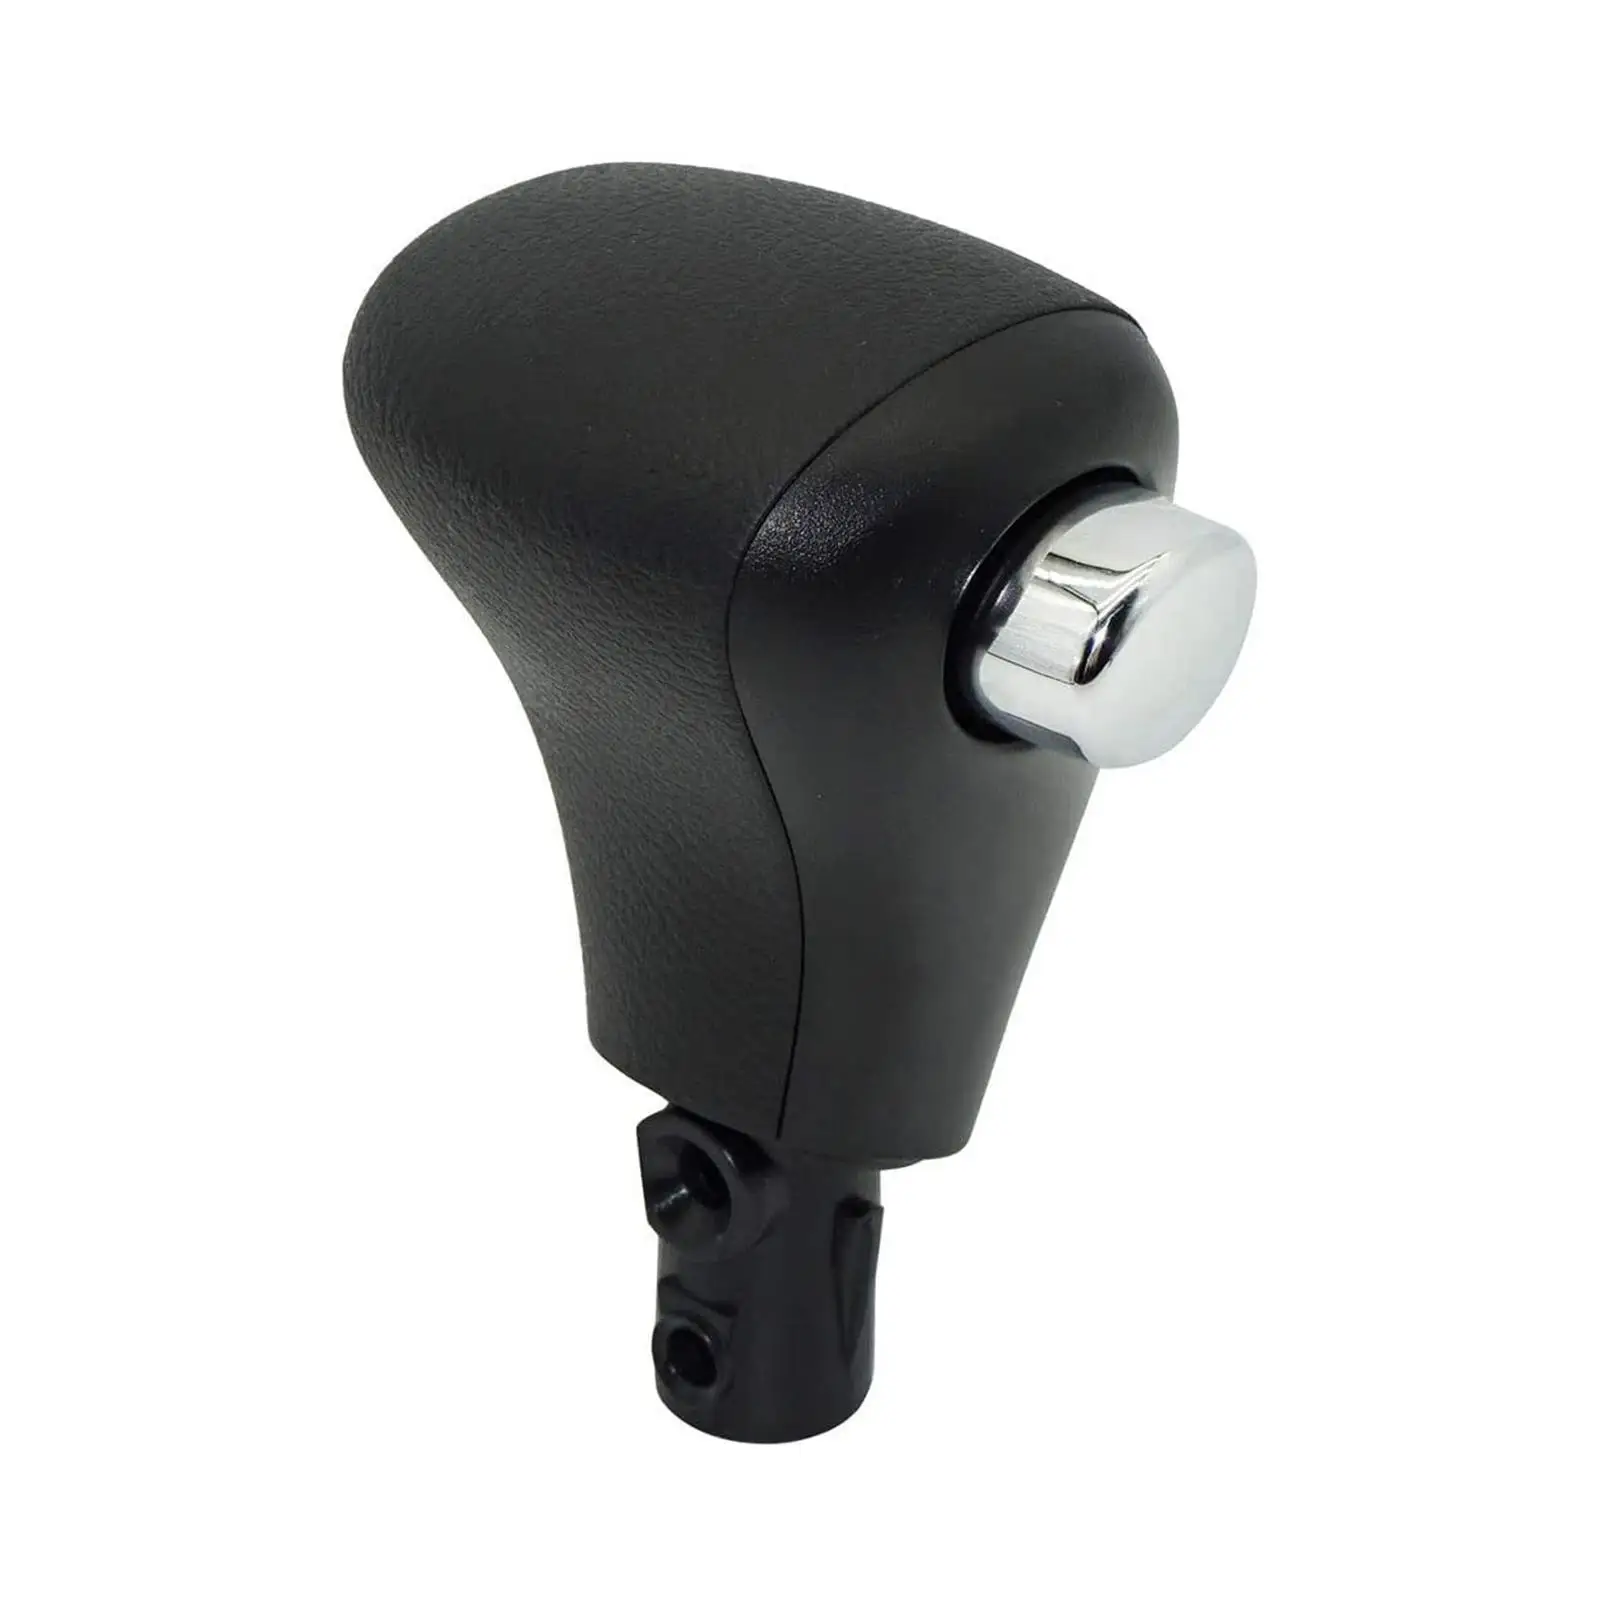 Gear Shift Lever Knob 54131-sda-a51 Automatic Gear Shift Handle for Honda Accord 4 Door Only 03-05 Stable Performance